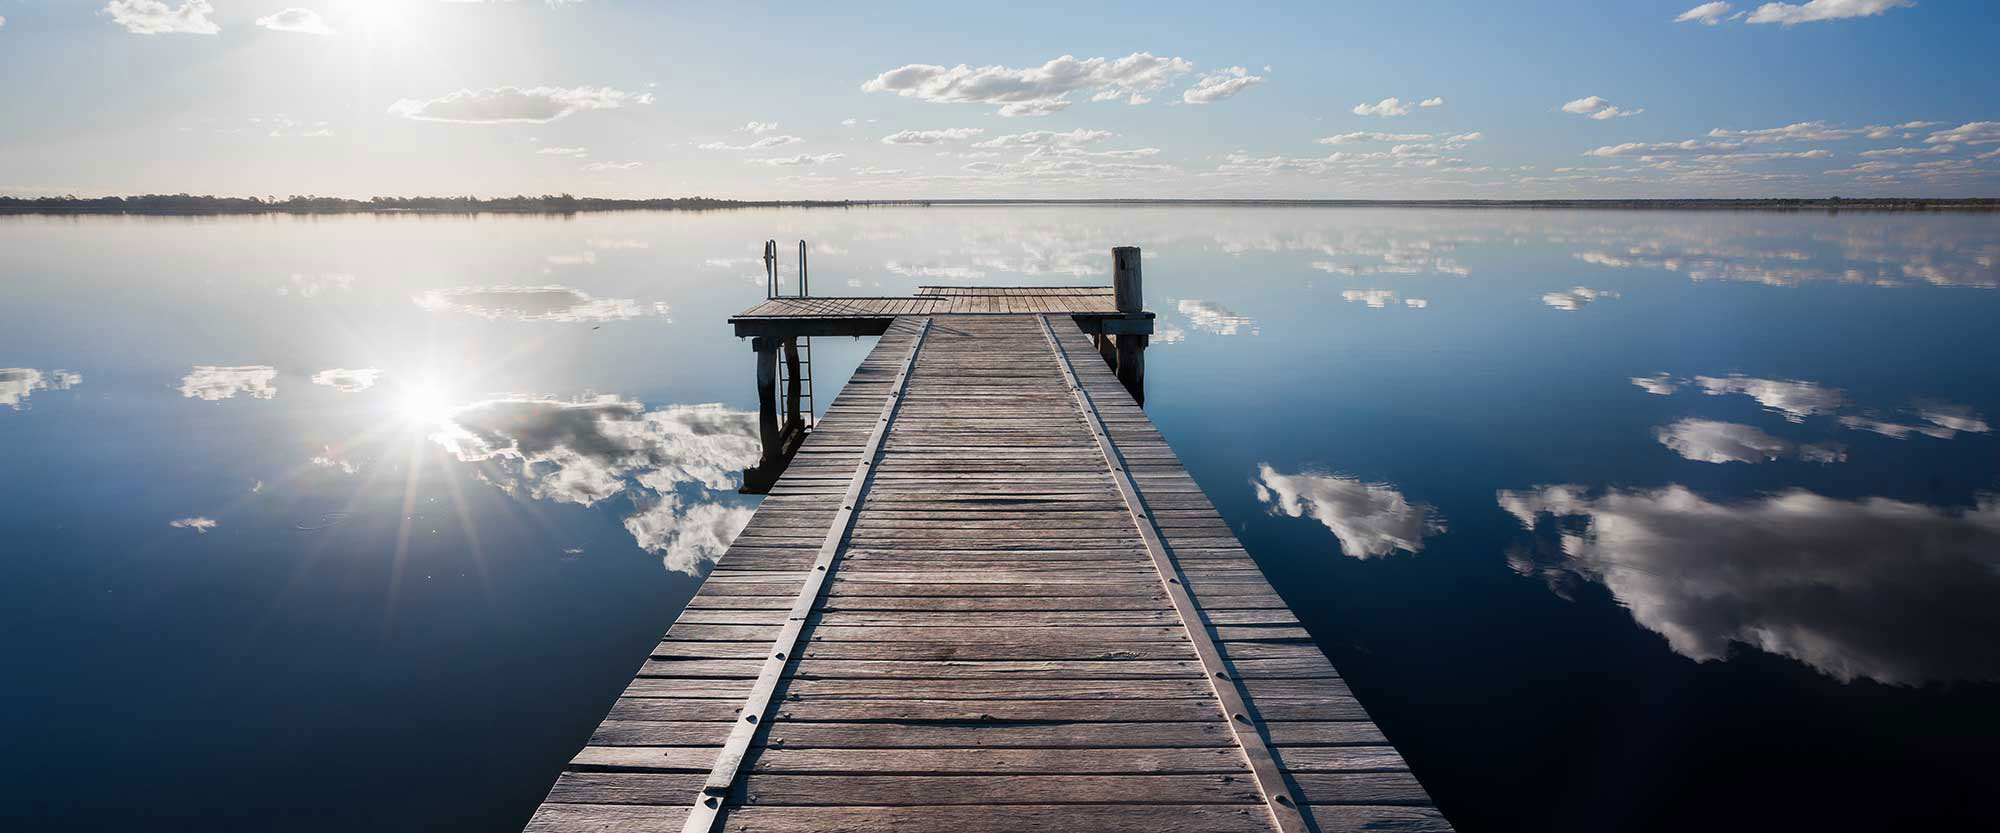 A wooden dock extends over a clear, blue lake on a sunny day. Puffy white clouds are reflected on the surface of the water.